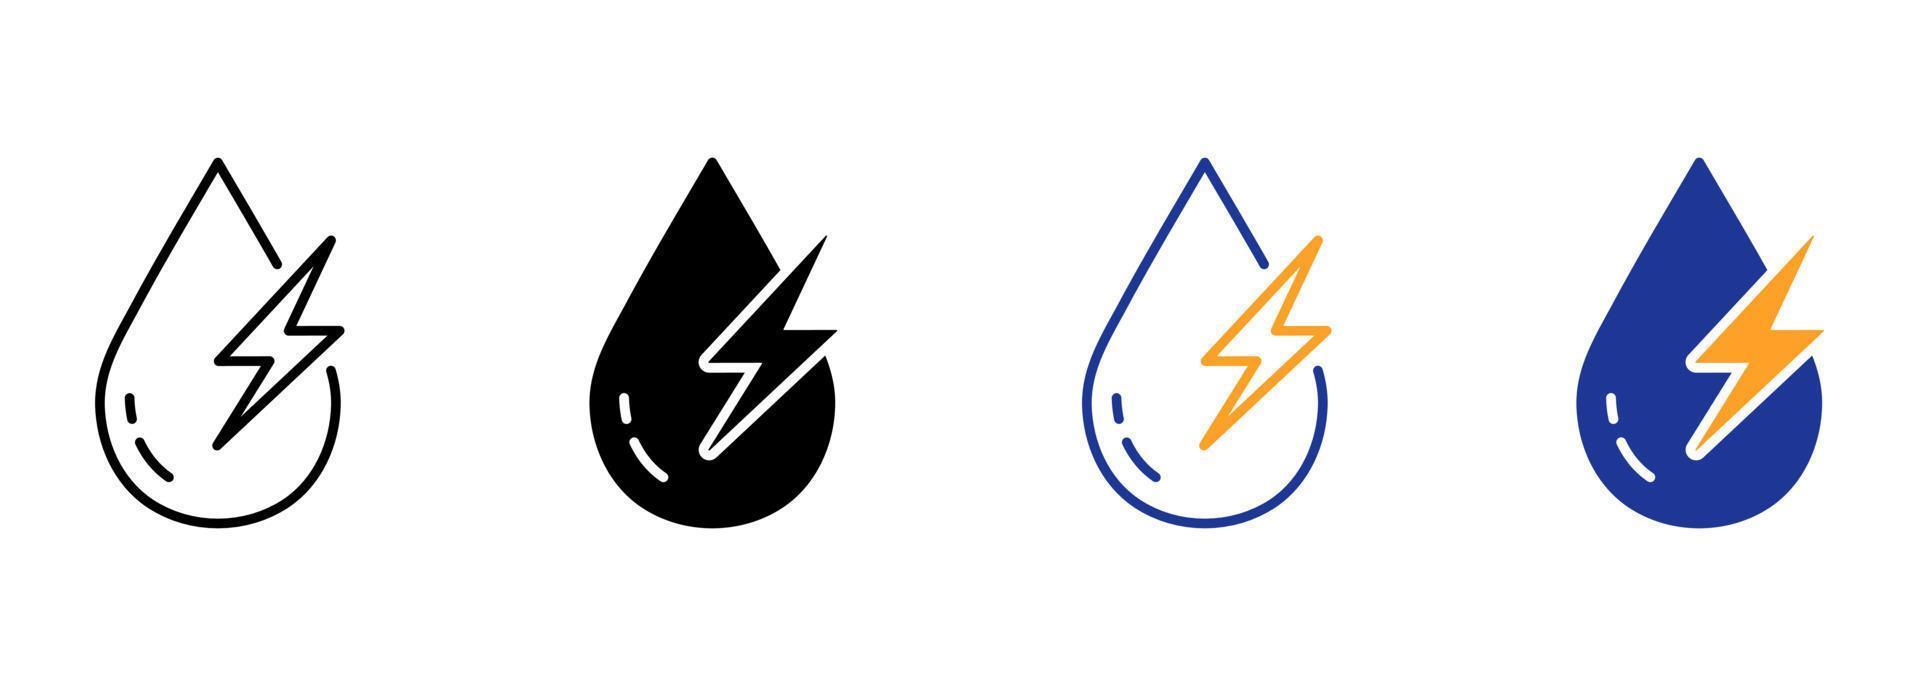 Water Energy Line and Silhouette Icon Color Set. Water Drop with Lightning Pictogram. Nature Eco Power Symbol Collection on White Background. Environmental Green Energy. Isolated Vector Illustration.